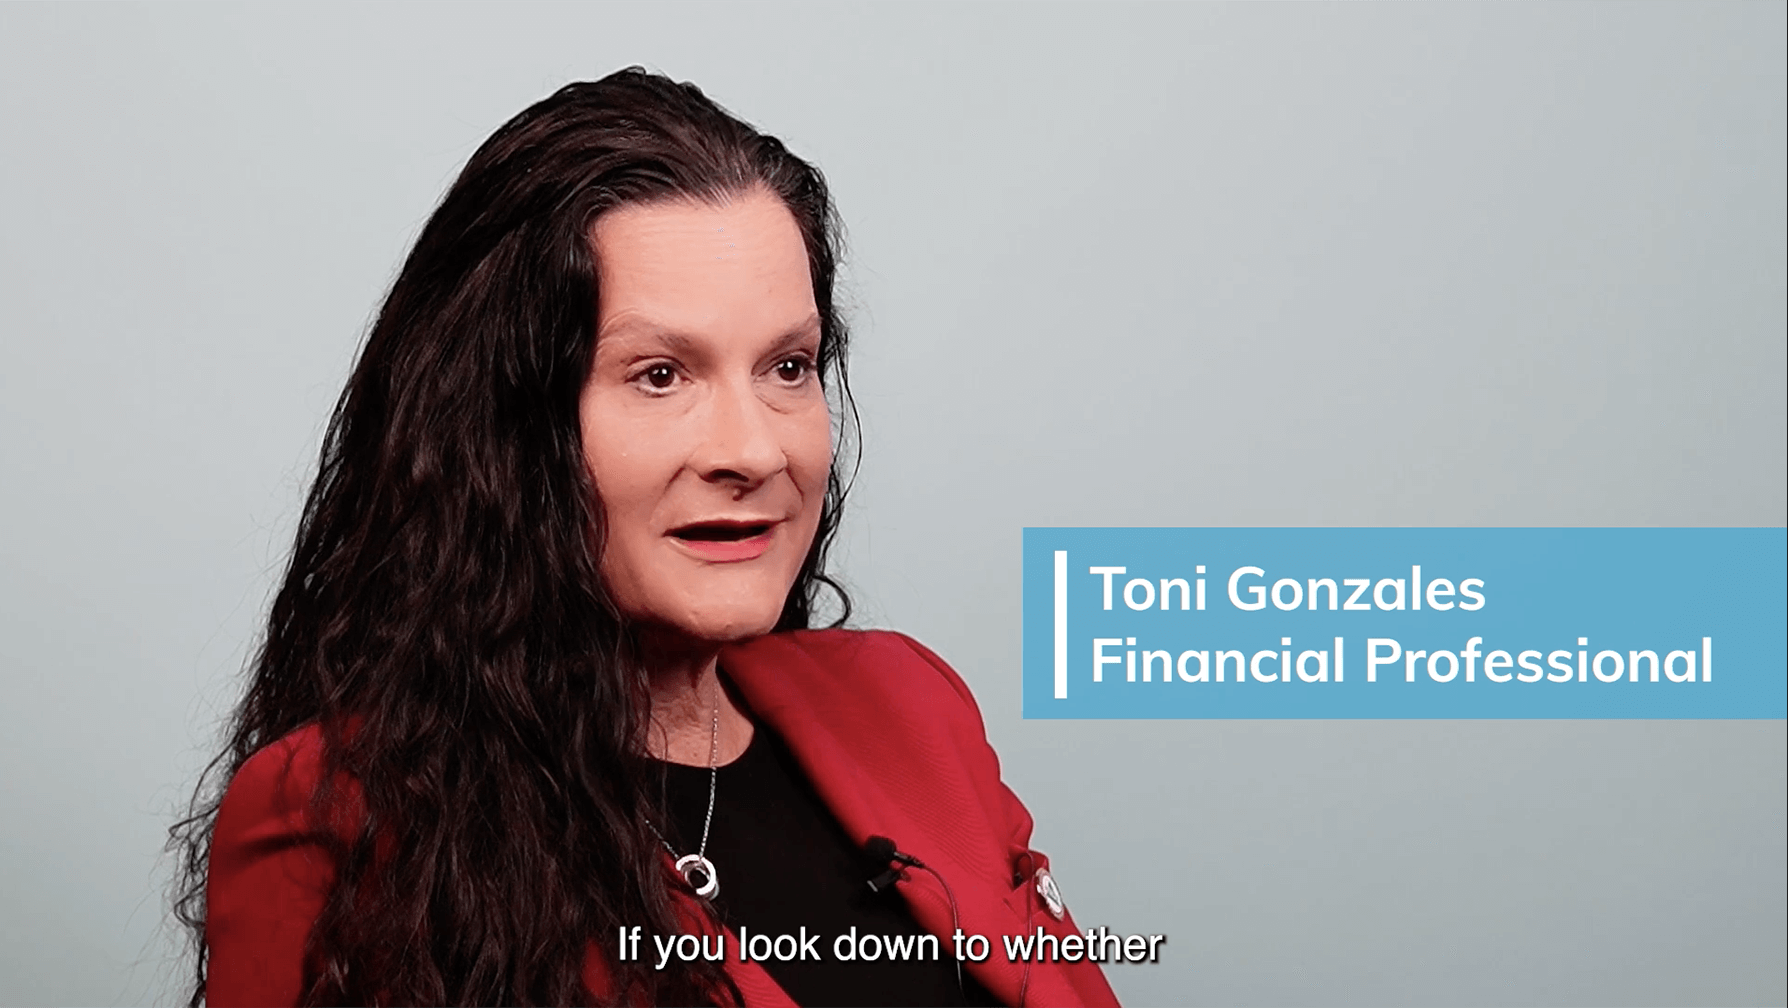 Consumer Protection Access to Financial Help Video